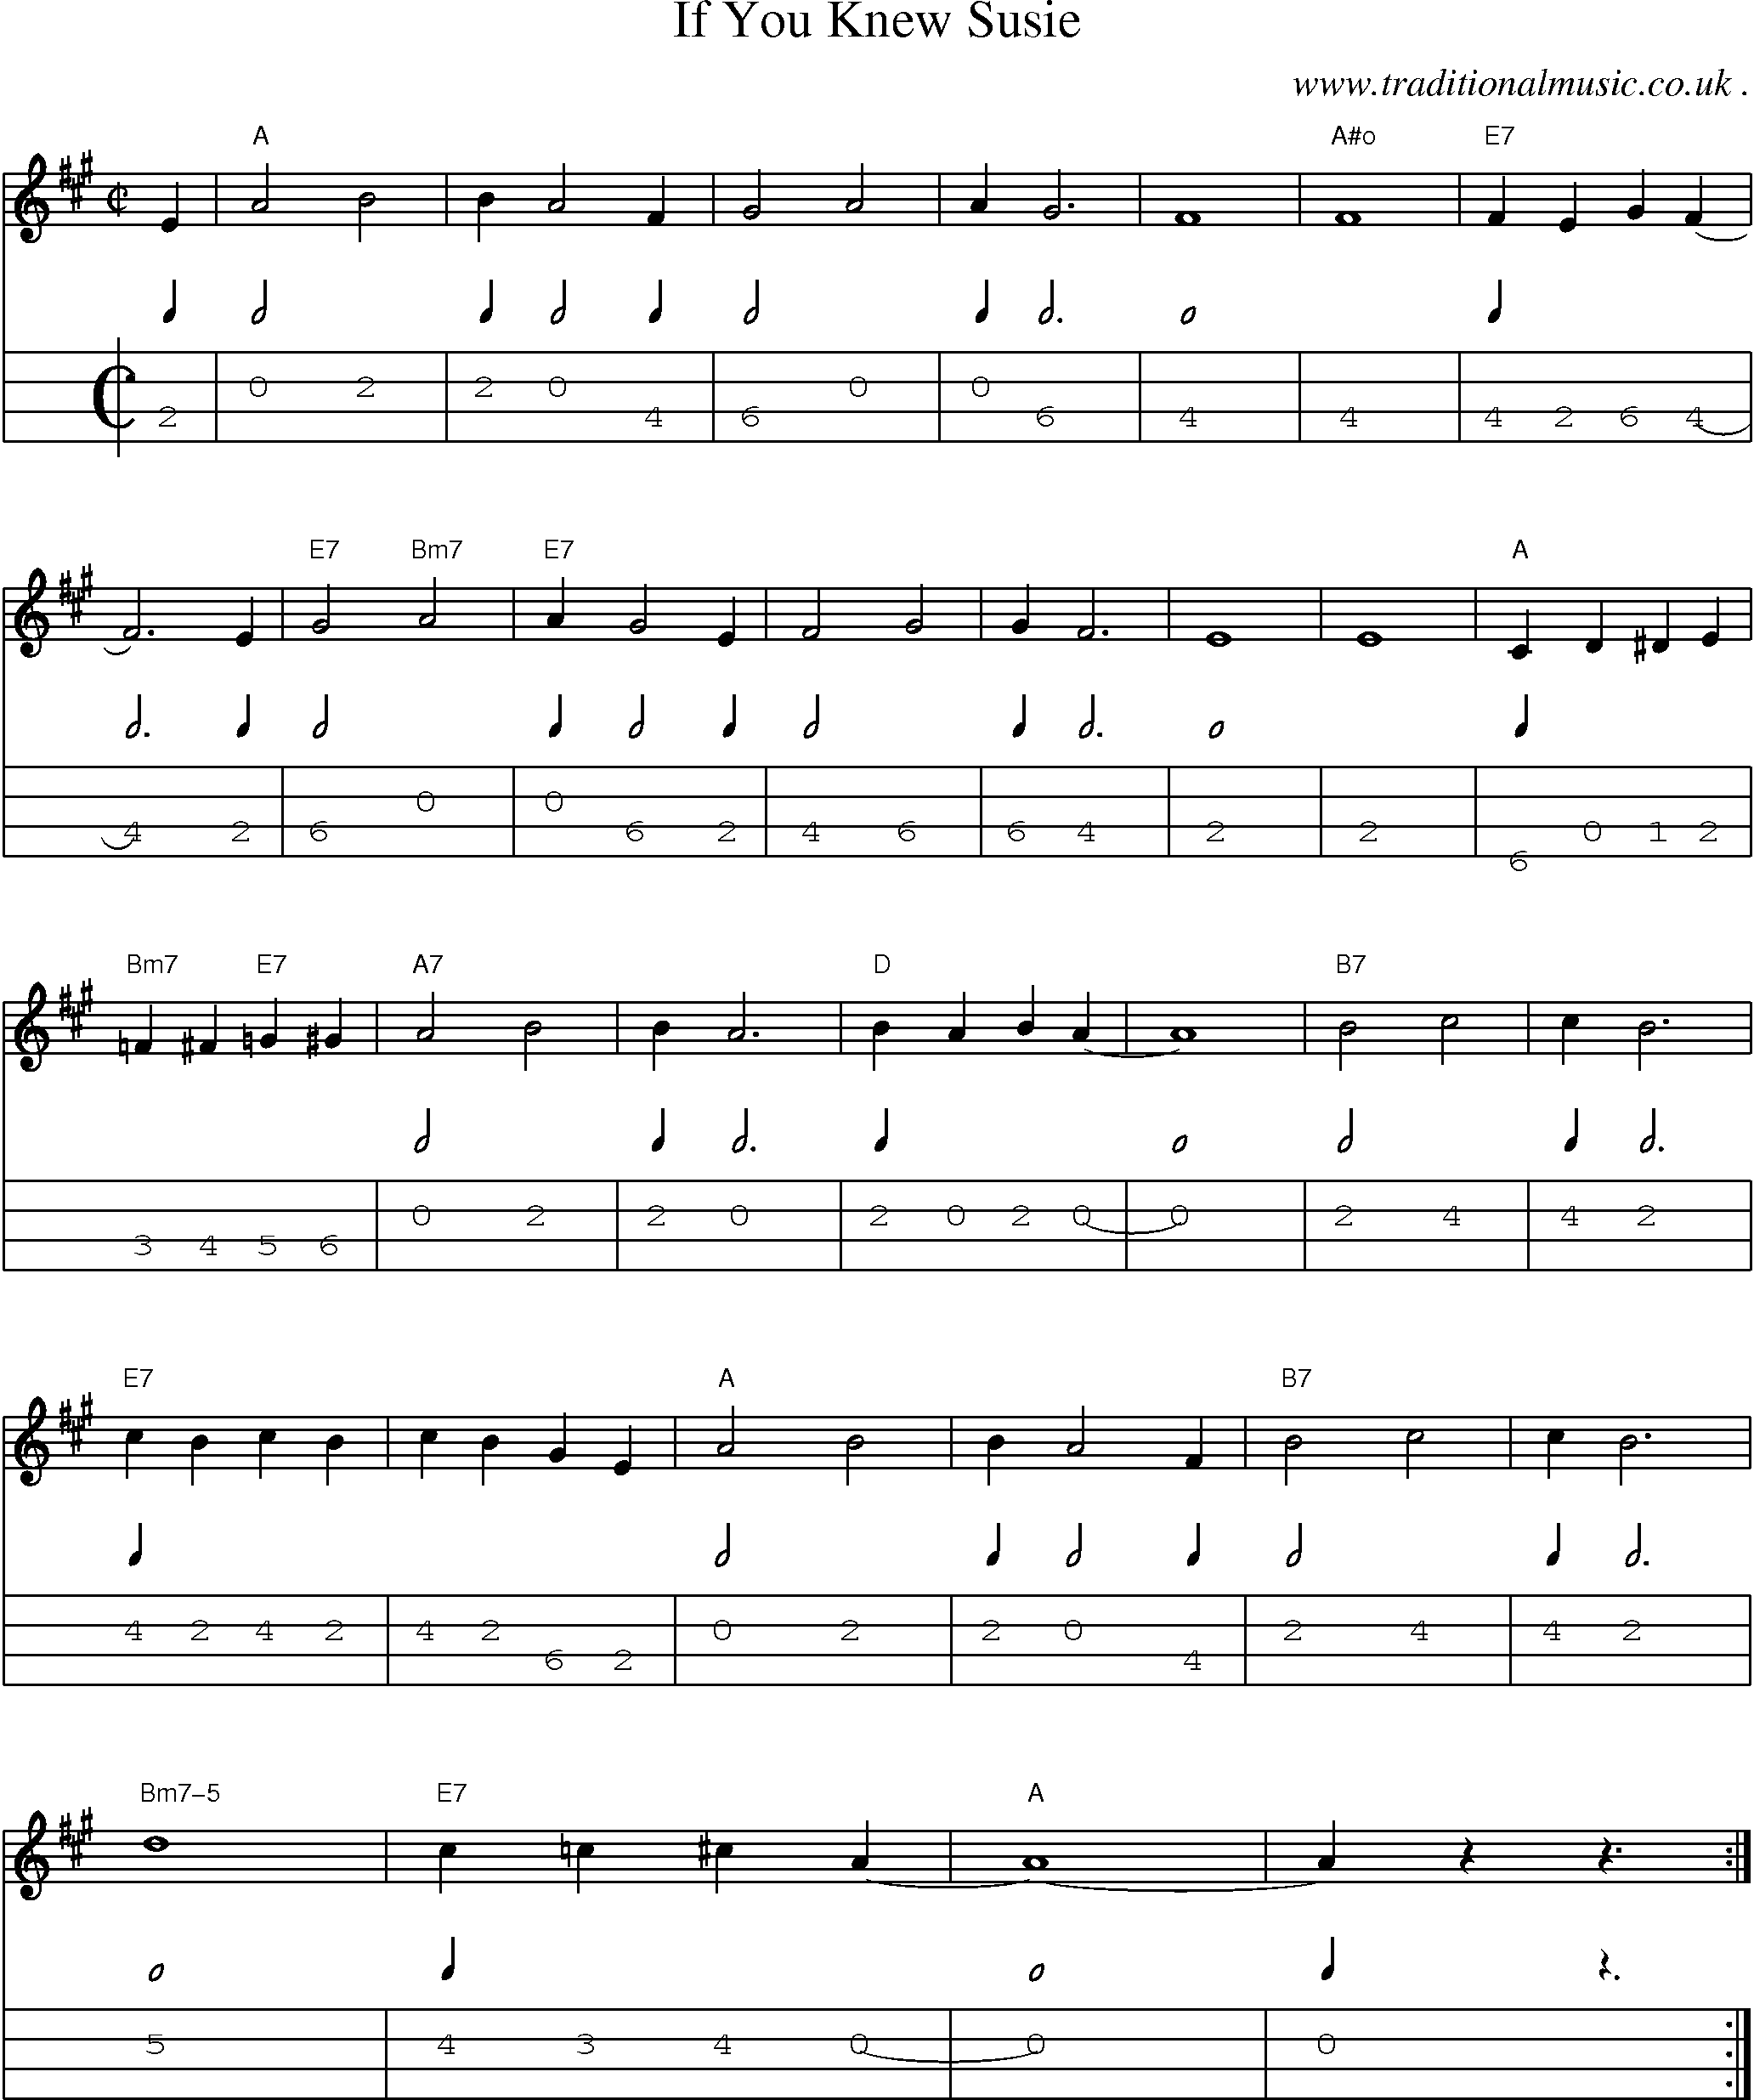 Music Score and Guitar Tabs for If You Knew Susie